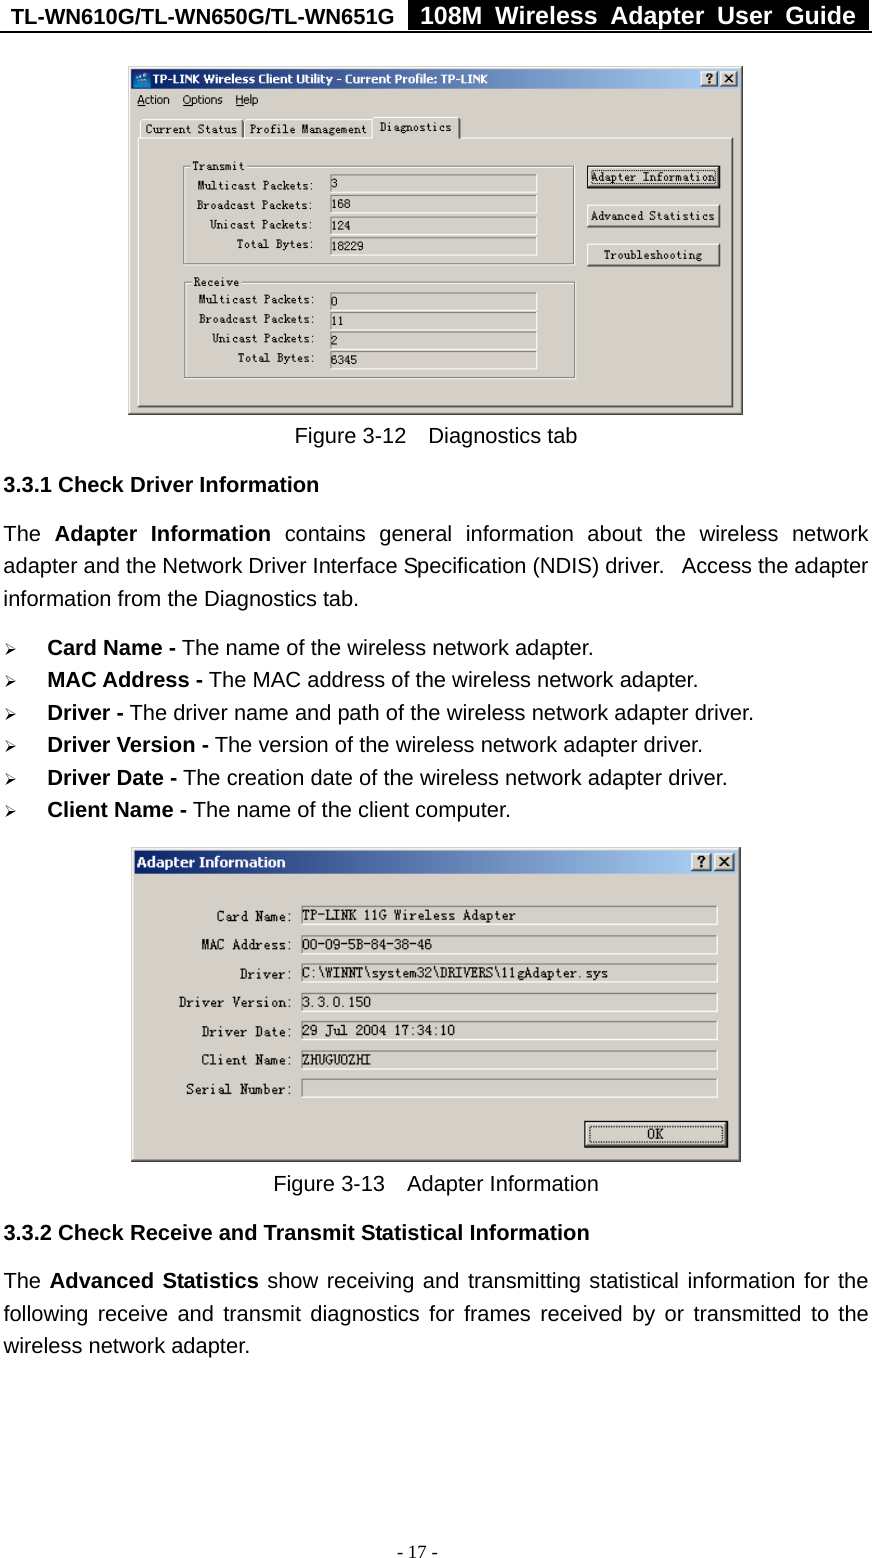 TL-WN610G/TL-WN650G/TL-WN651G  108M Wireless Adapter User Guide  - 17 -  Figure 3-12  Diagnostics tab 3.3.1 Check Driver Information The  Adapter Information contains general information about the wireless network adapter and the Network Driver Interface Specification (NDIS) driver.   Access the adapter information from the Diagnostics tab. ¾ Card Name - The name of the wireless network adapter.   ¾ MAC Address - The MAC address of the wireless network adapter.   ¾ Driver - The driver name and path of the wireless network adapter driver. ¾ Driver Version - The version of the wireless network adapter driver. ¾ Driver Date - The creation date of the wireless network adapter driver. ¾ Client Name - The name of the client computer.    Figure 3-13  Adapter Information 3.3.2 Check Receive and Transmit Statistical Information The Advanced Statistics show receiving and transmitting statistical information for the following receive and transmit diagnostics for frames received by or transmitted to the wireless network adapter. 